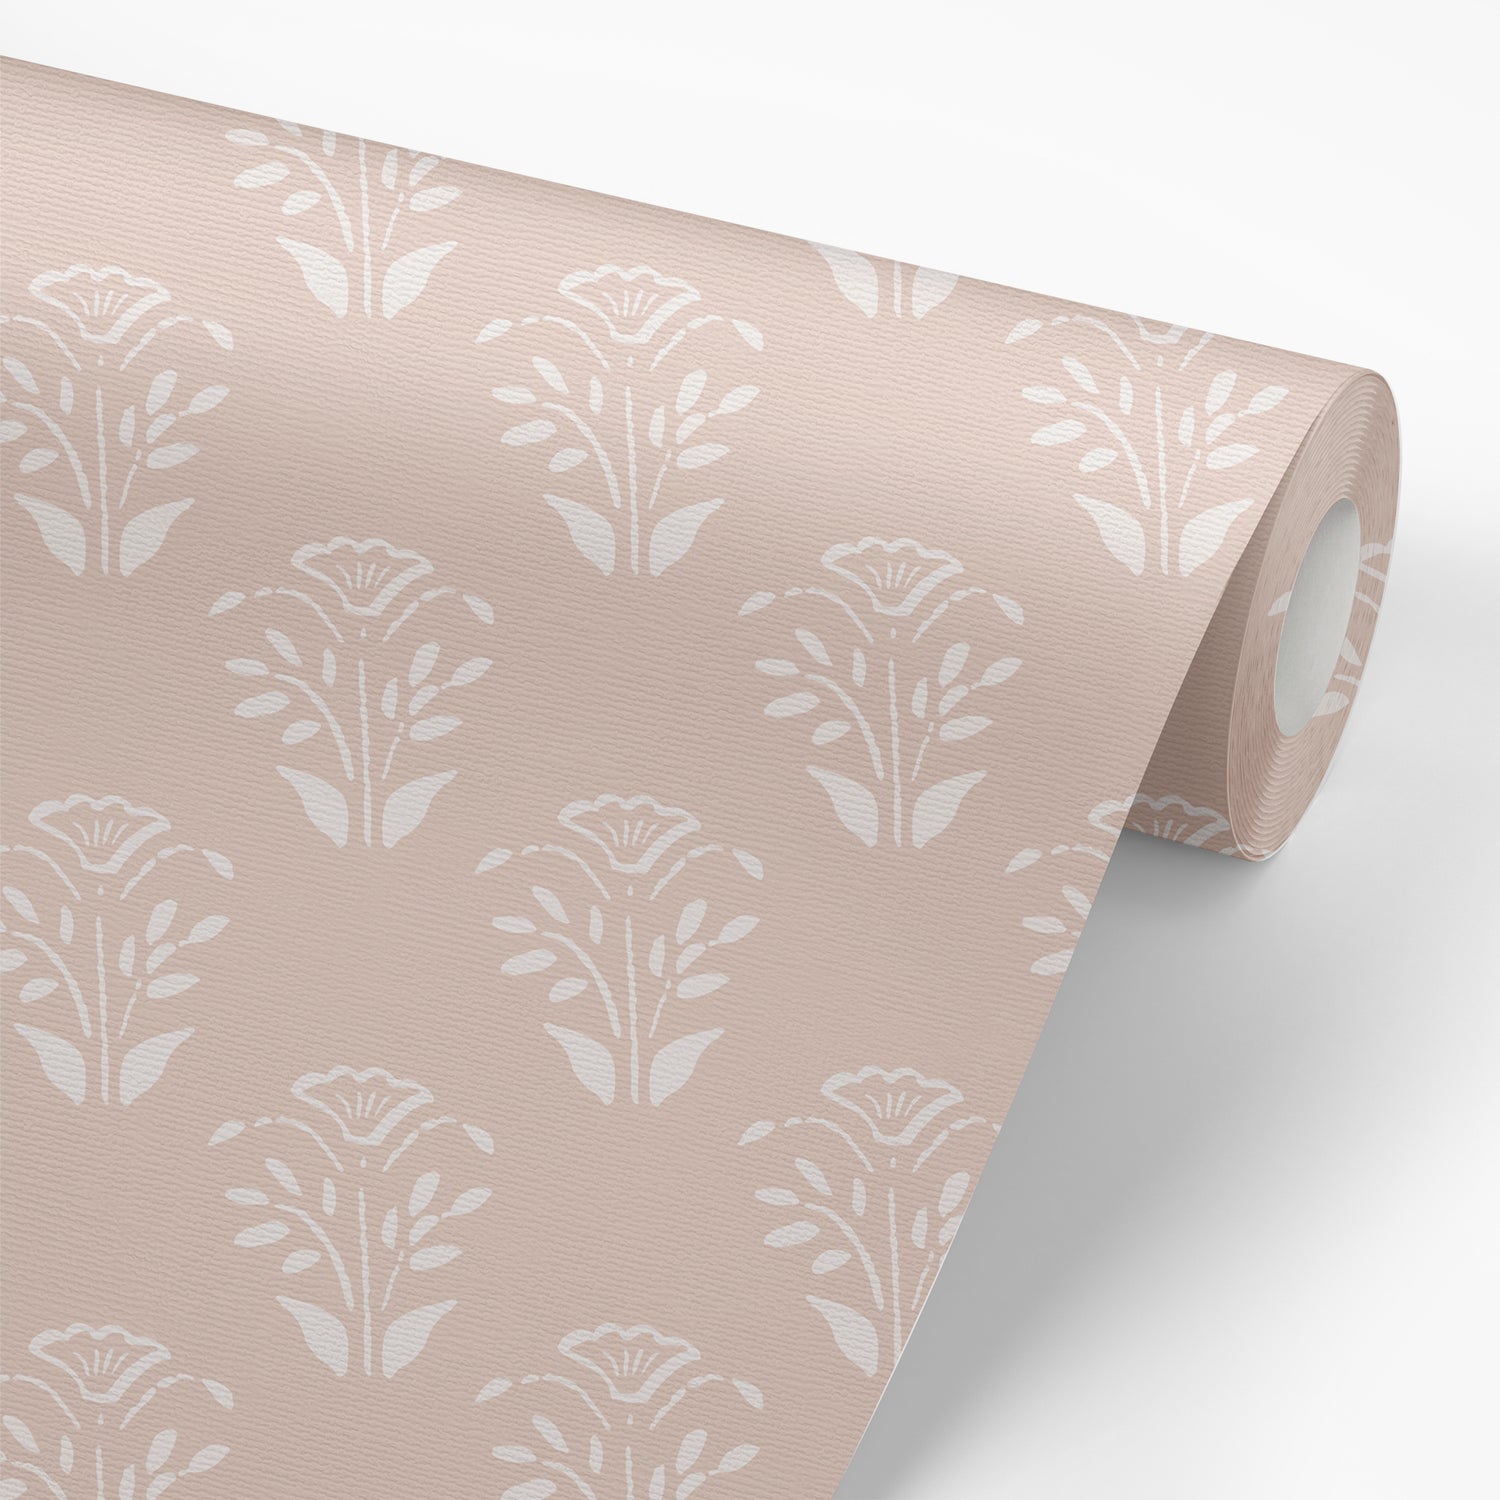 Wallpaper panel of our Lulu Peel and Stick Wallpaper in Nude by Jackie O'Bosky. Hand drawn floral motifs in white on a nude background.